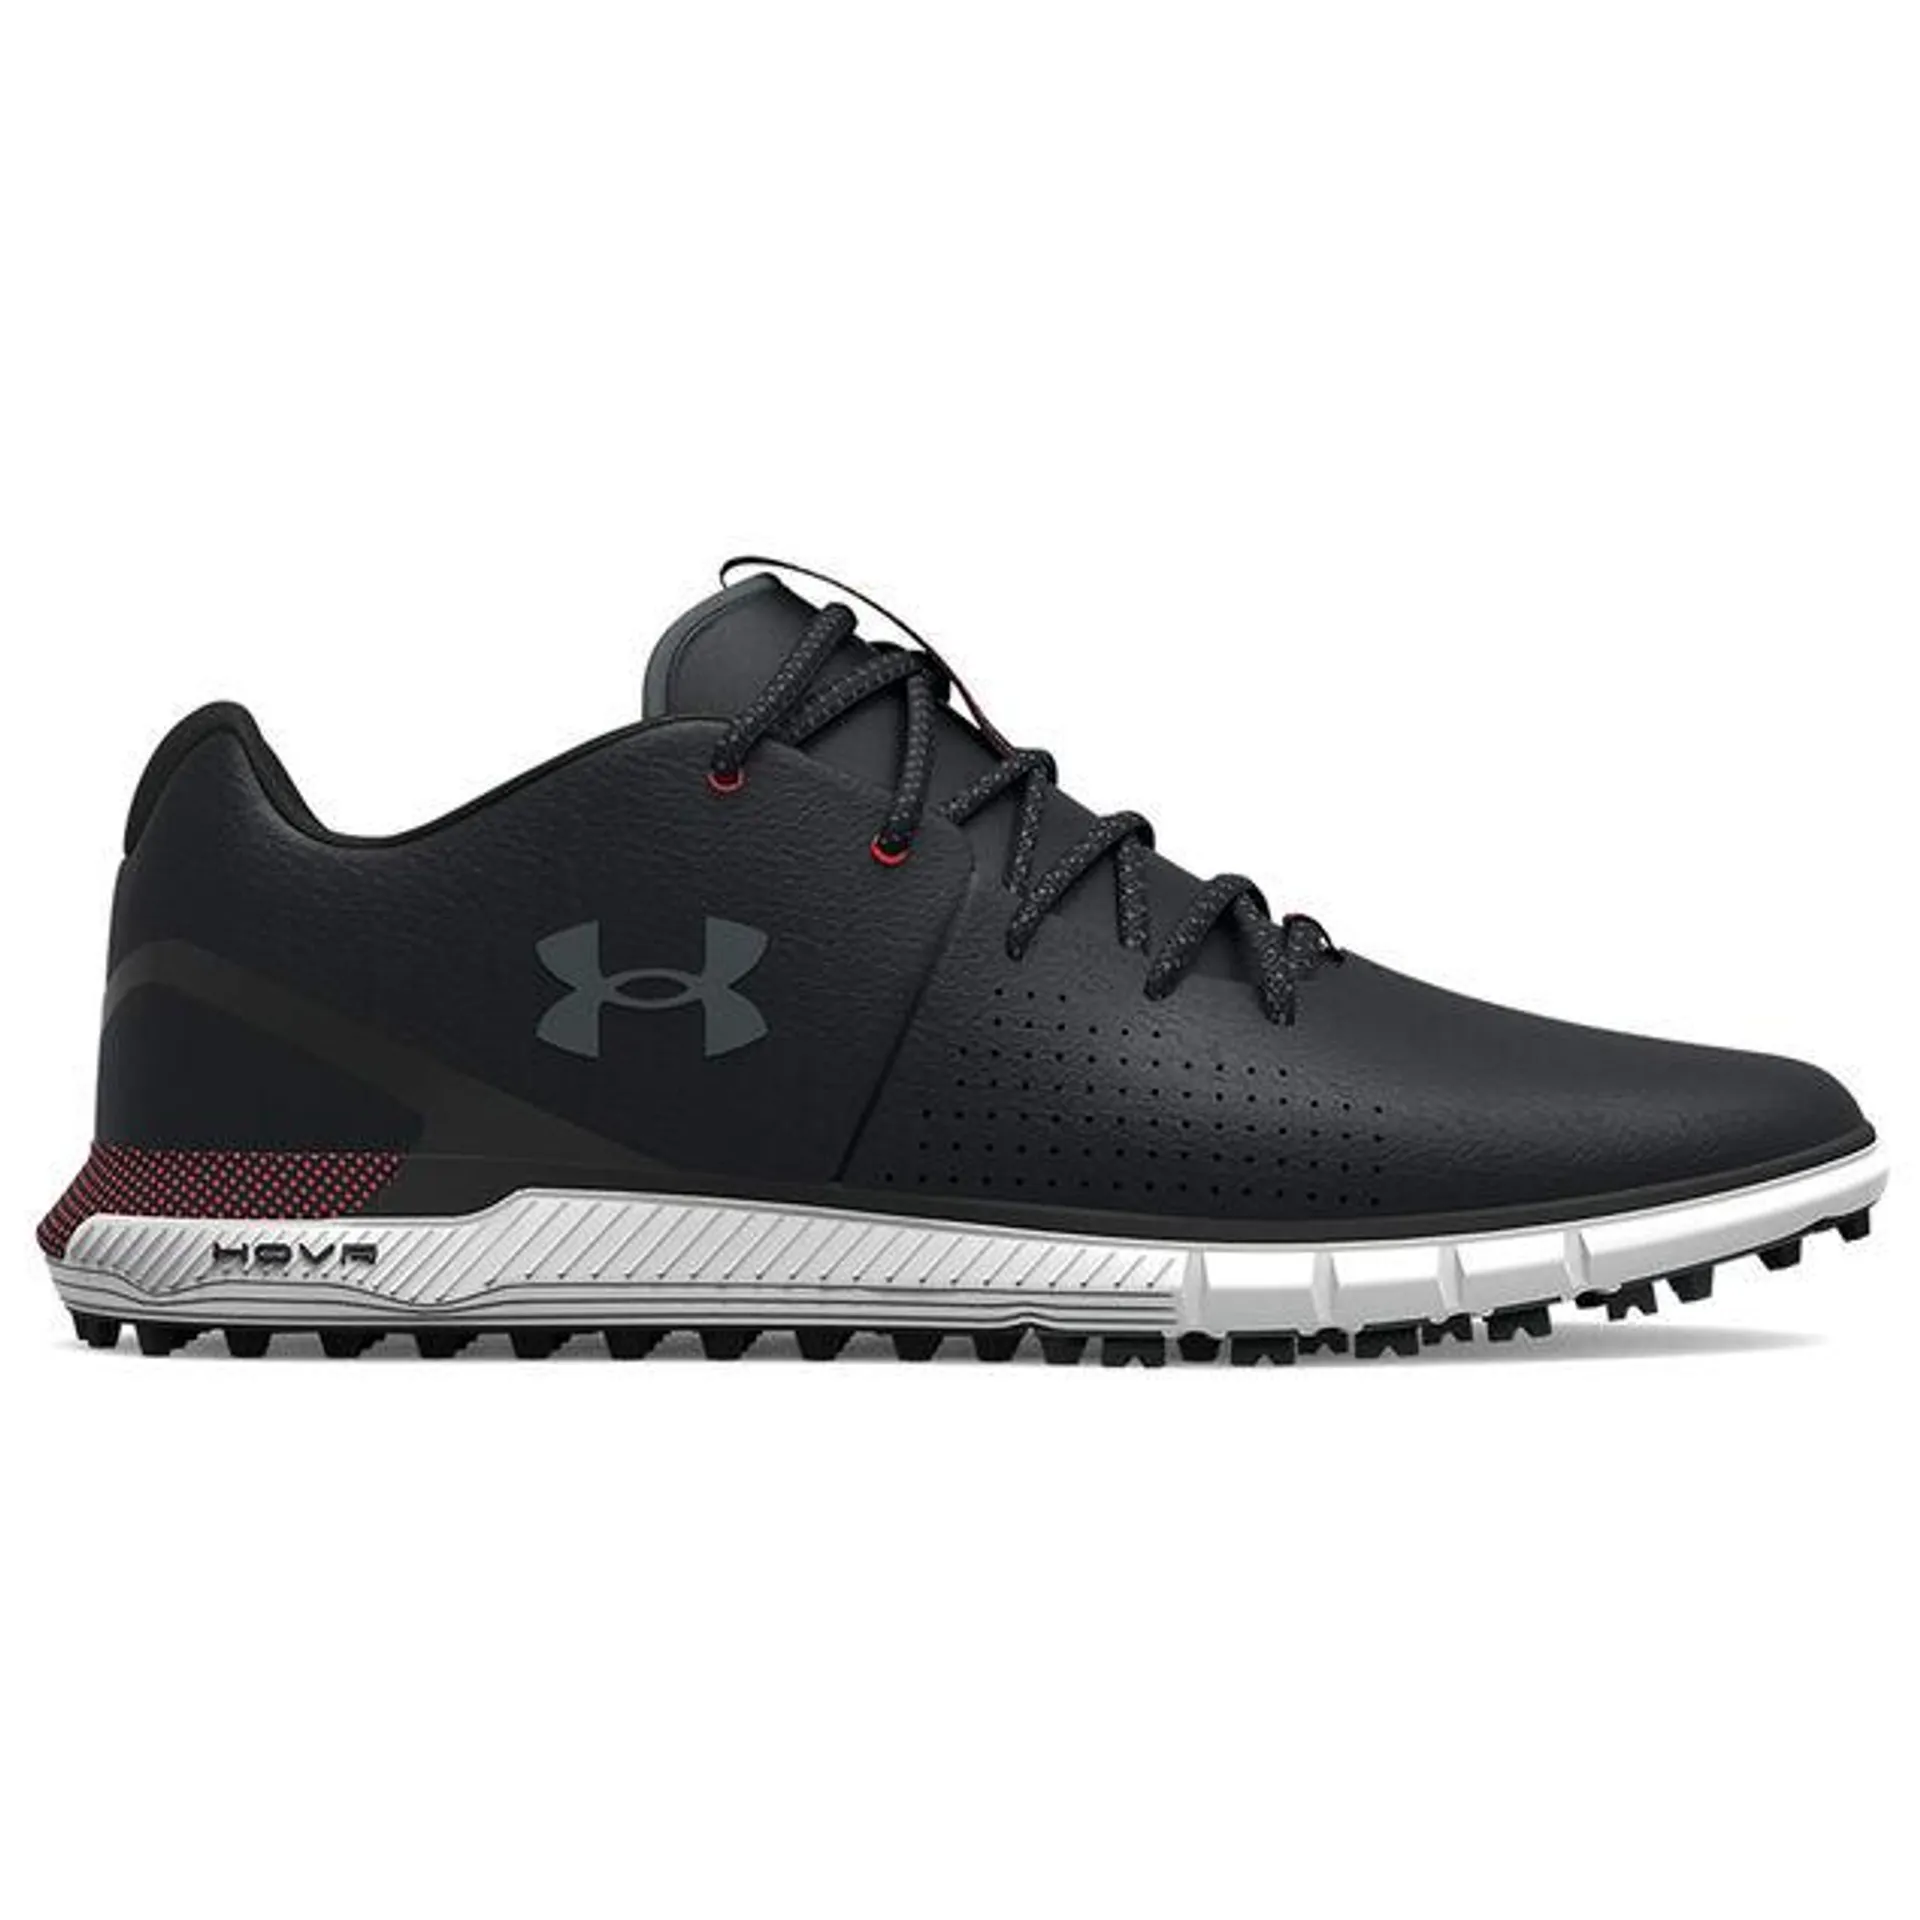 Under Armour Men's HOVR Fade 2 Wide Spikeless Golf Shoes